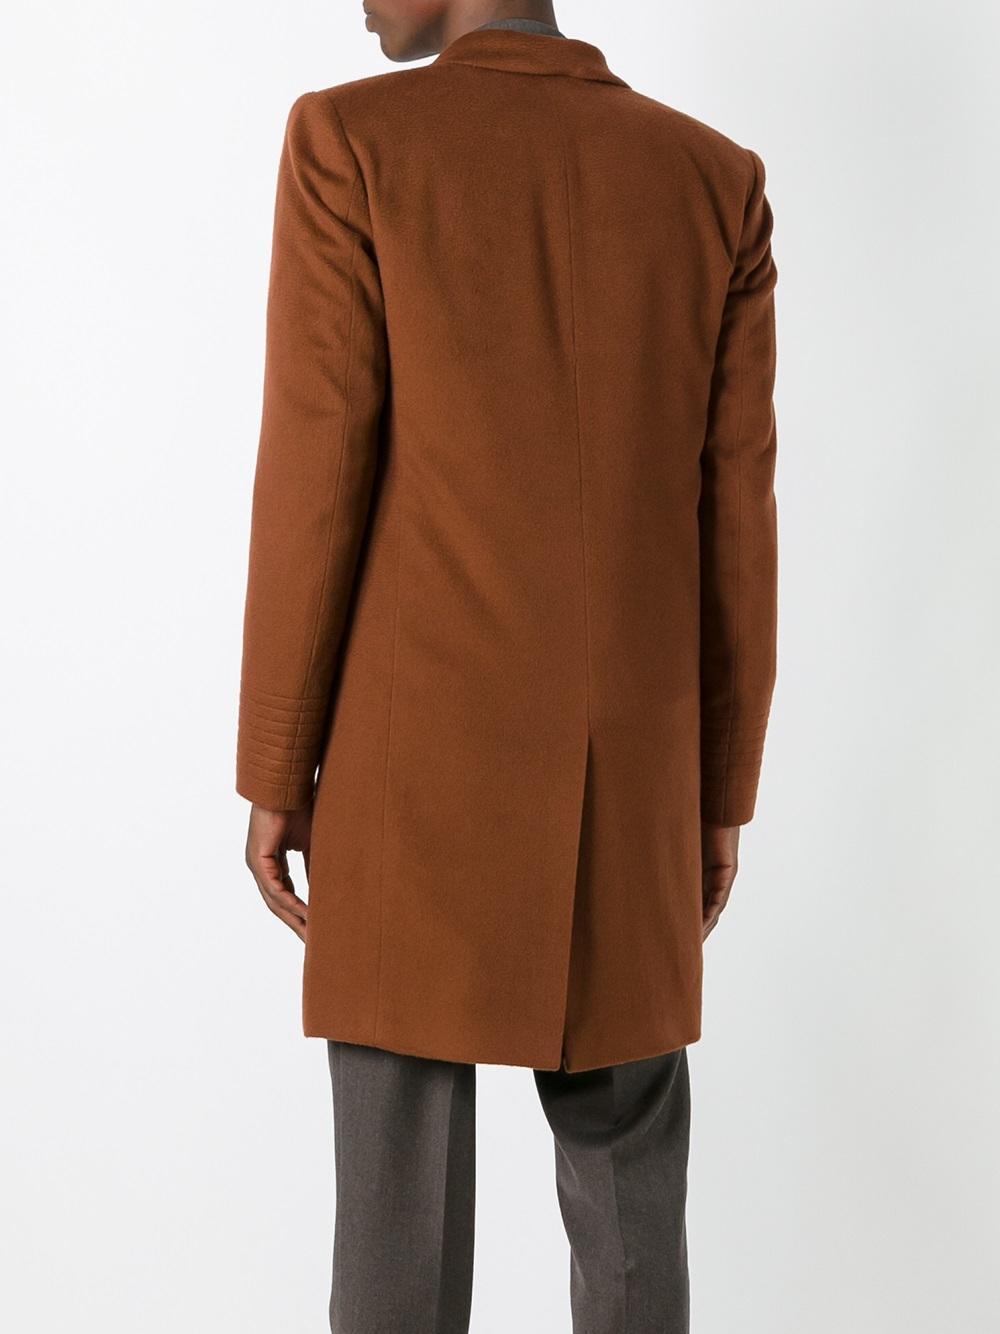 Paul Smith Cashmere 'a Coat To Travel In' Overcoat in Brown for Men - Lyst